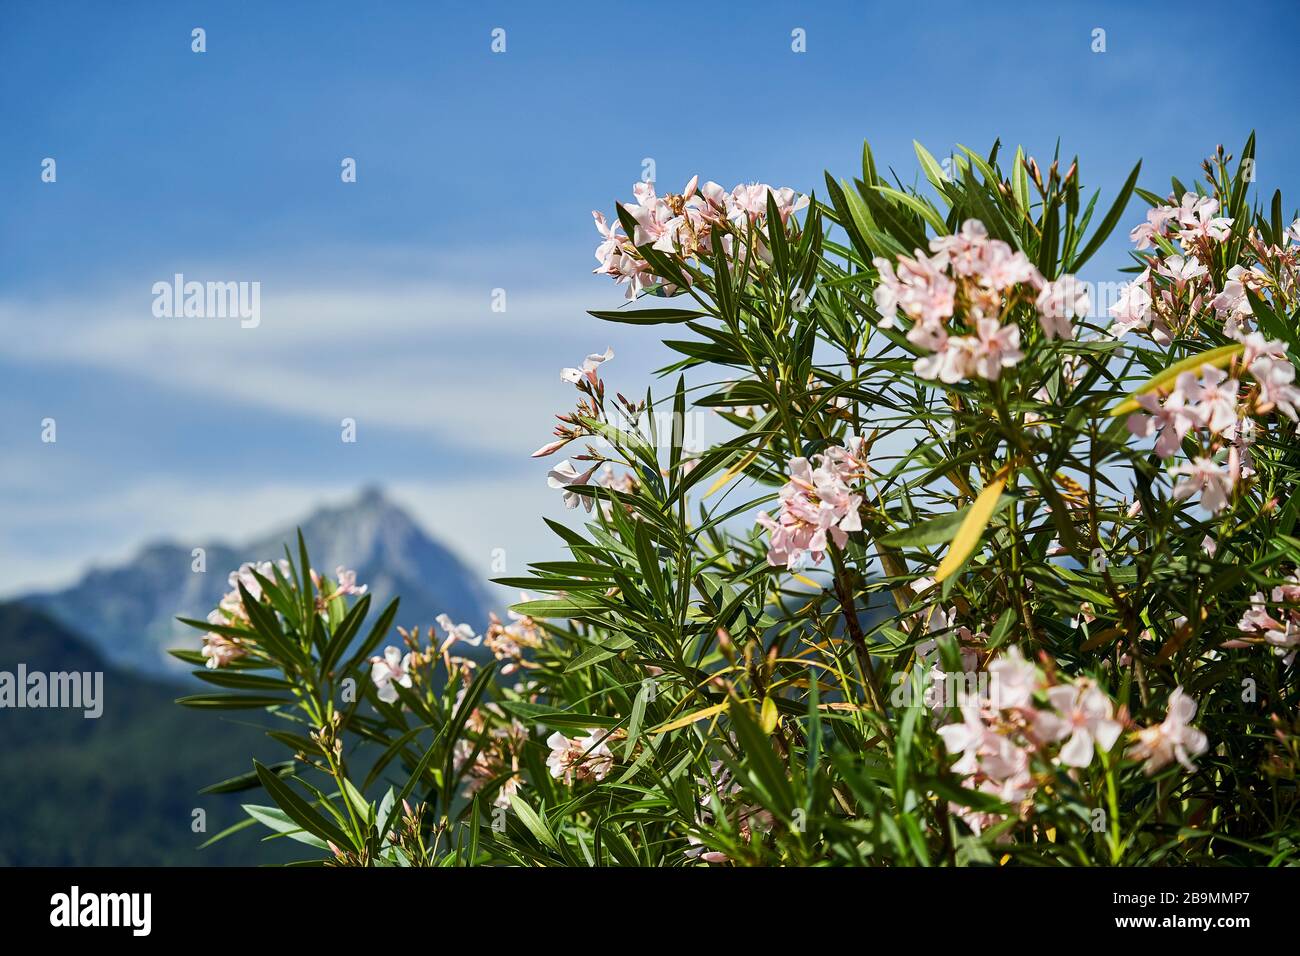 Oleander bush in full pink colord blossom in foreground. A blurred image of a mountain in the background. Depth of filed. Stock Photo